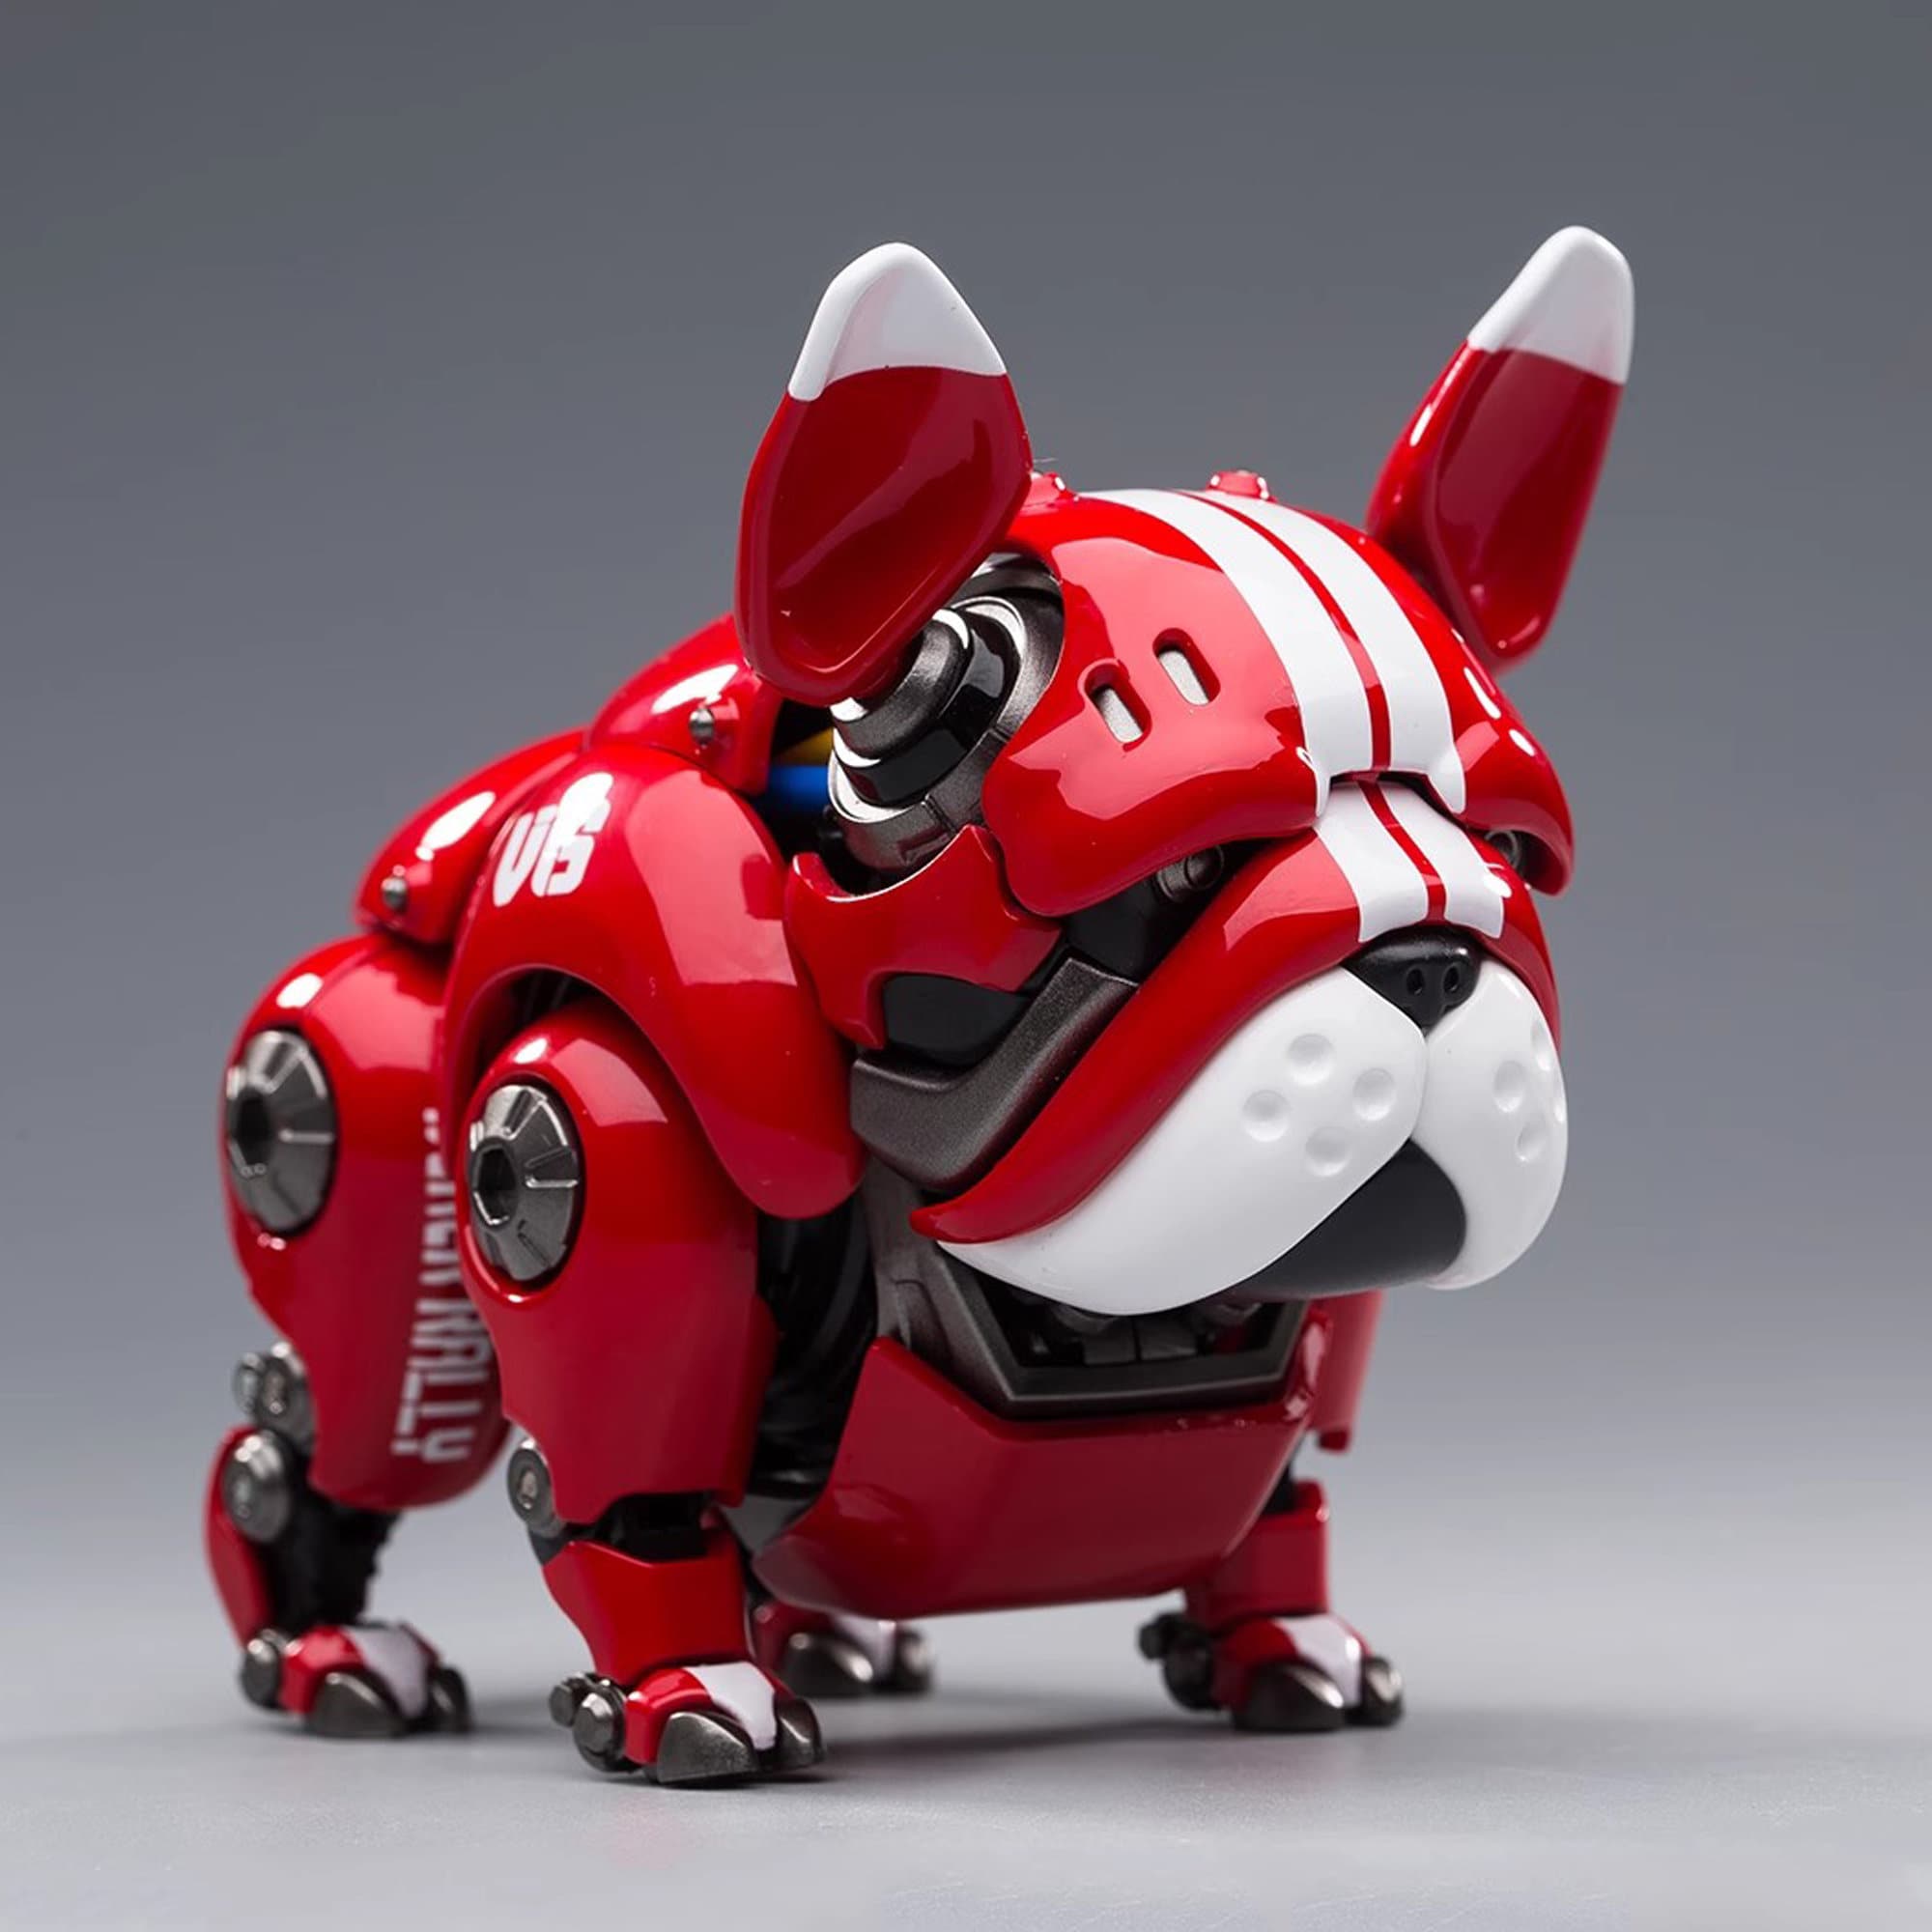 Eilik - Cute Robot Pets for Kids and Adults, Your Ireland